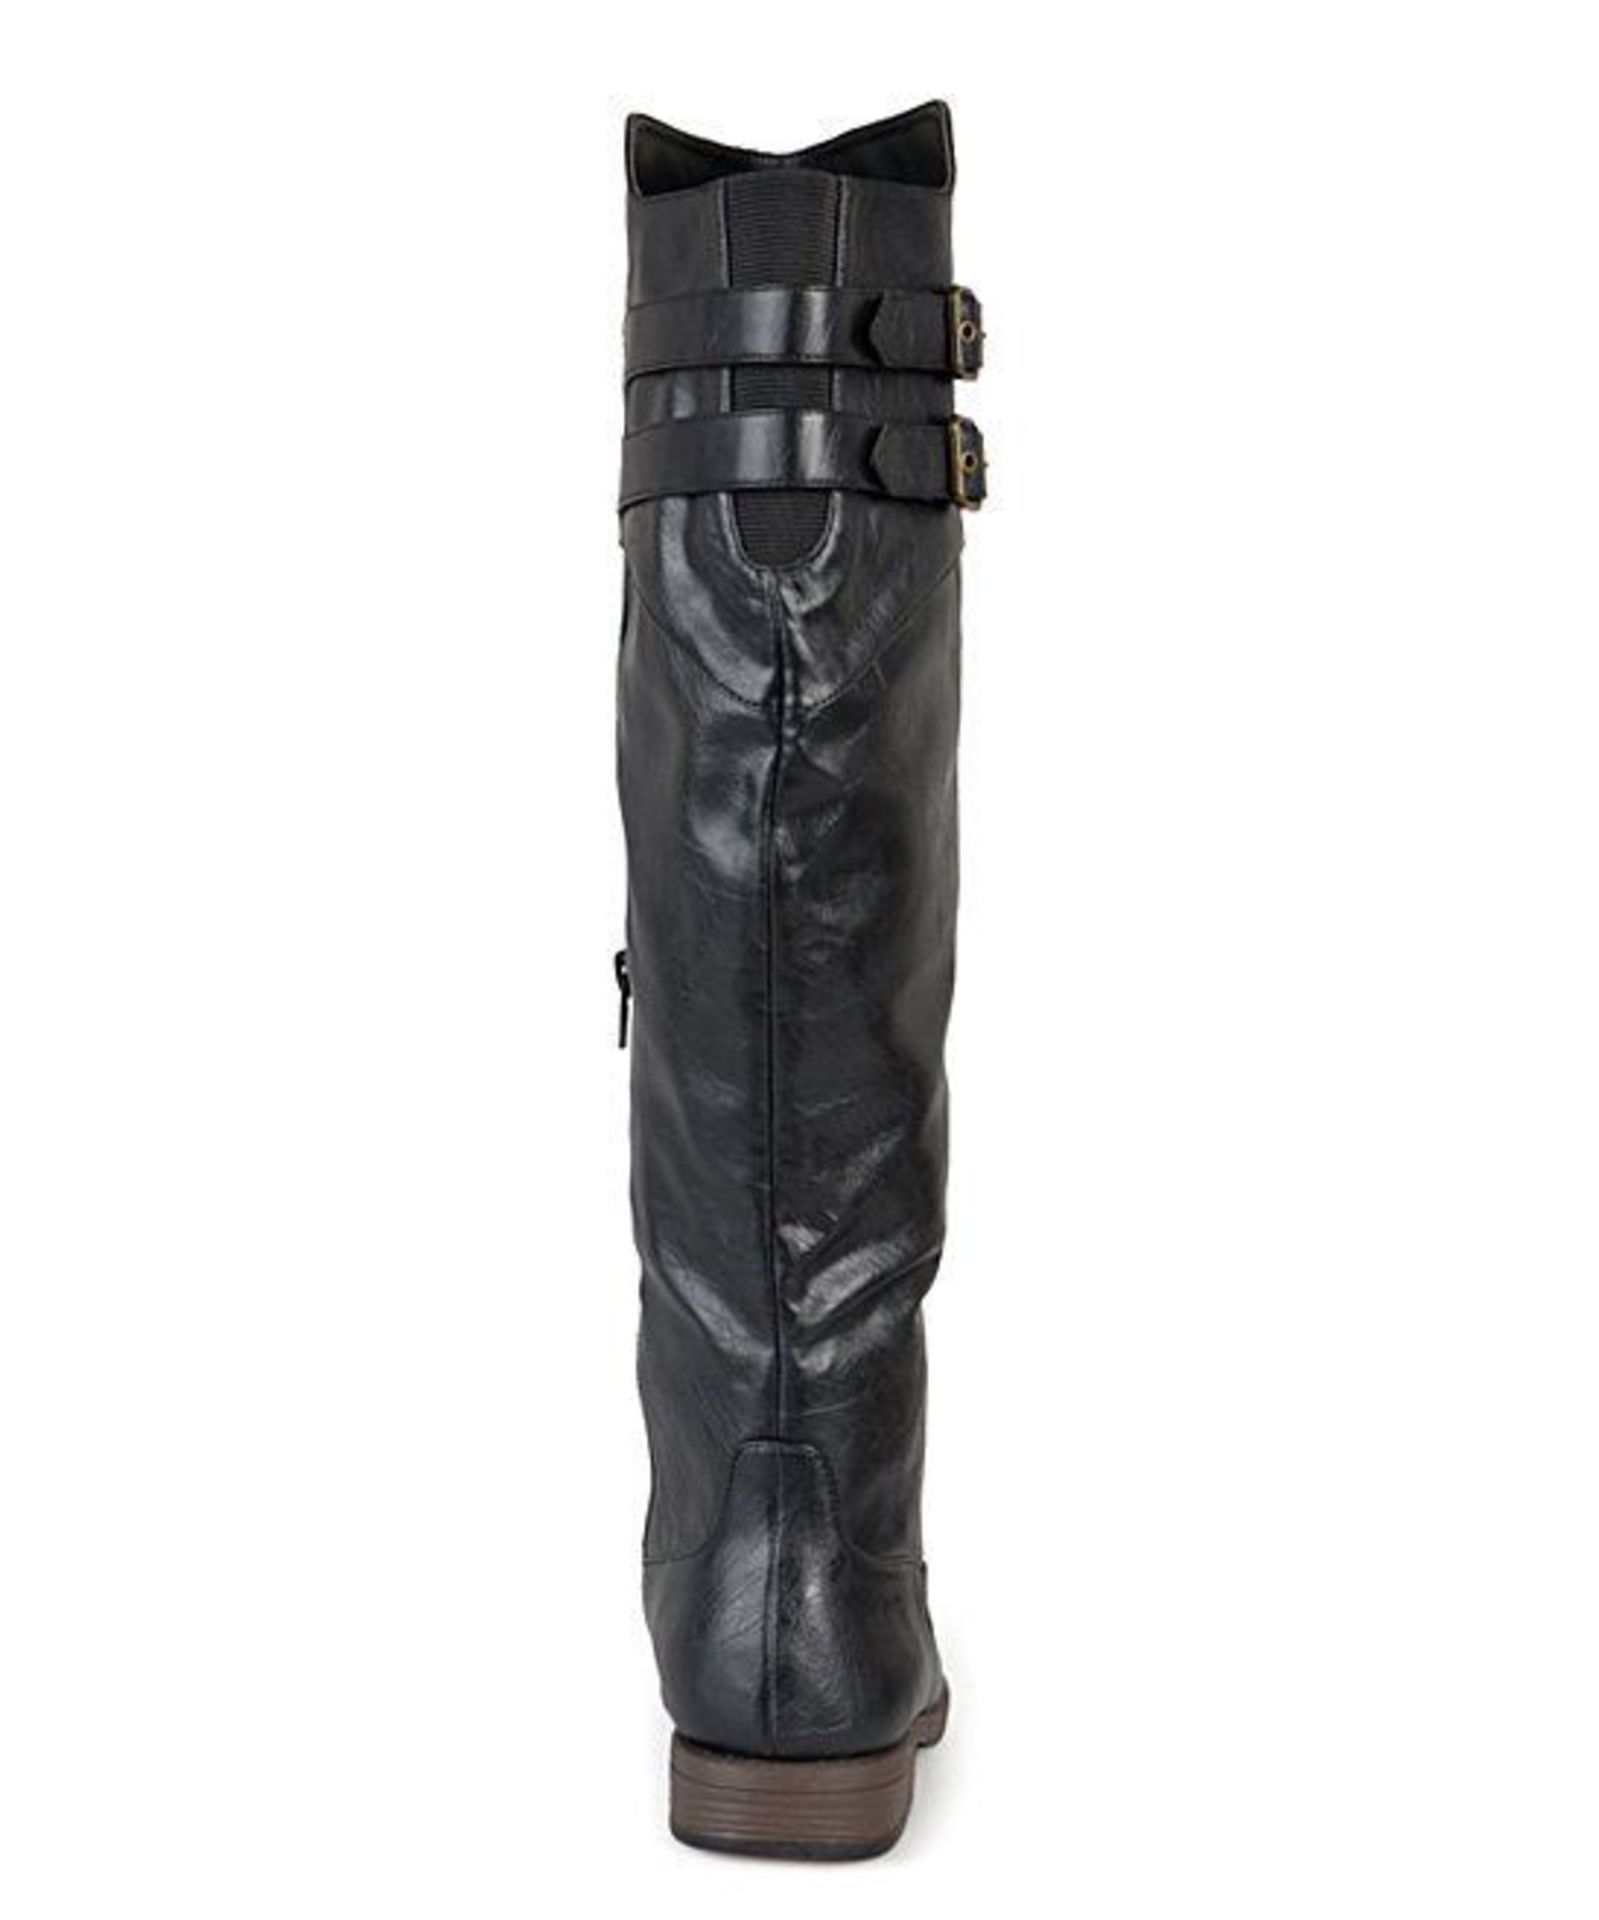 Journee Collection Black Tori Riding Boot (Uk Size 7:Us Size 9) (New with box) [Ref: 14251407-I- - Image 3 of 4